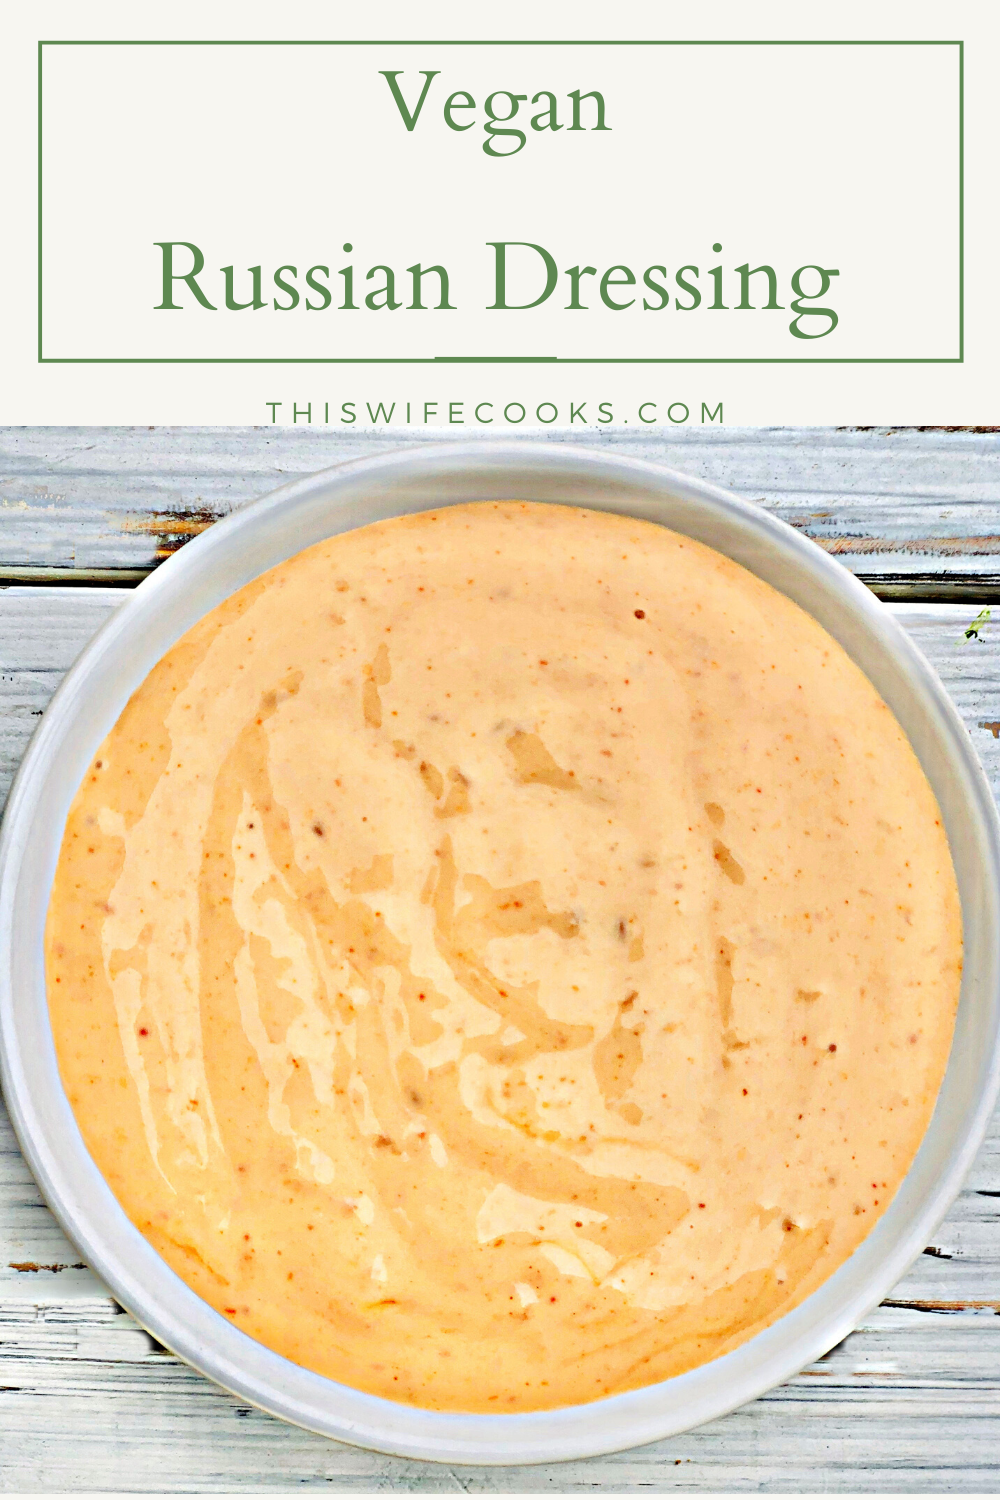 Vegan Russian Dressing - A dairy-free version of the classic dressing and sandwich spread! #vegansaladdressing #dairyfreesaladdressing #thiswifecooksrecipes via @thiswifecooks